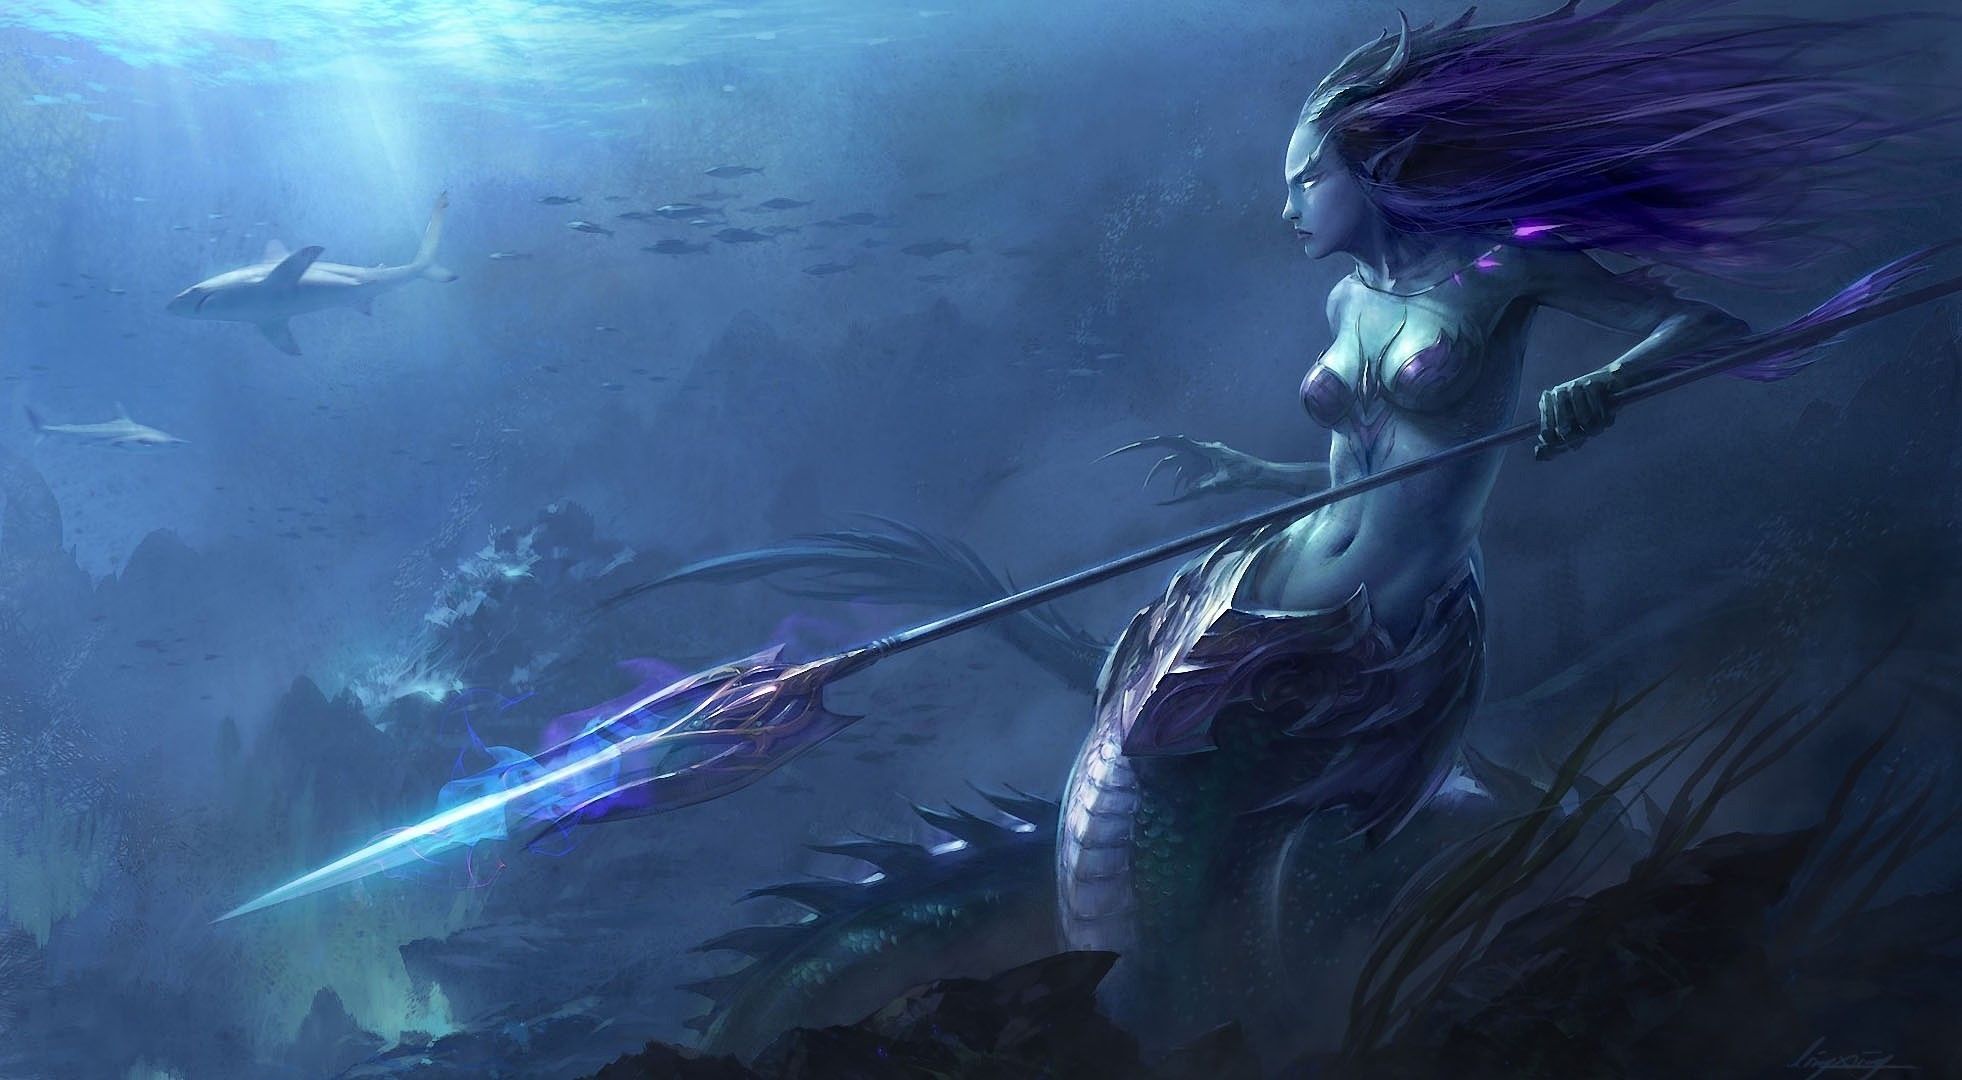 A mermaid holding an axe and standing in the water - Mermaid